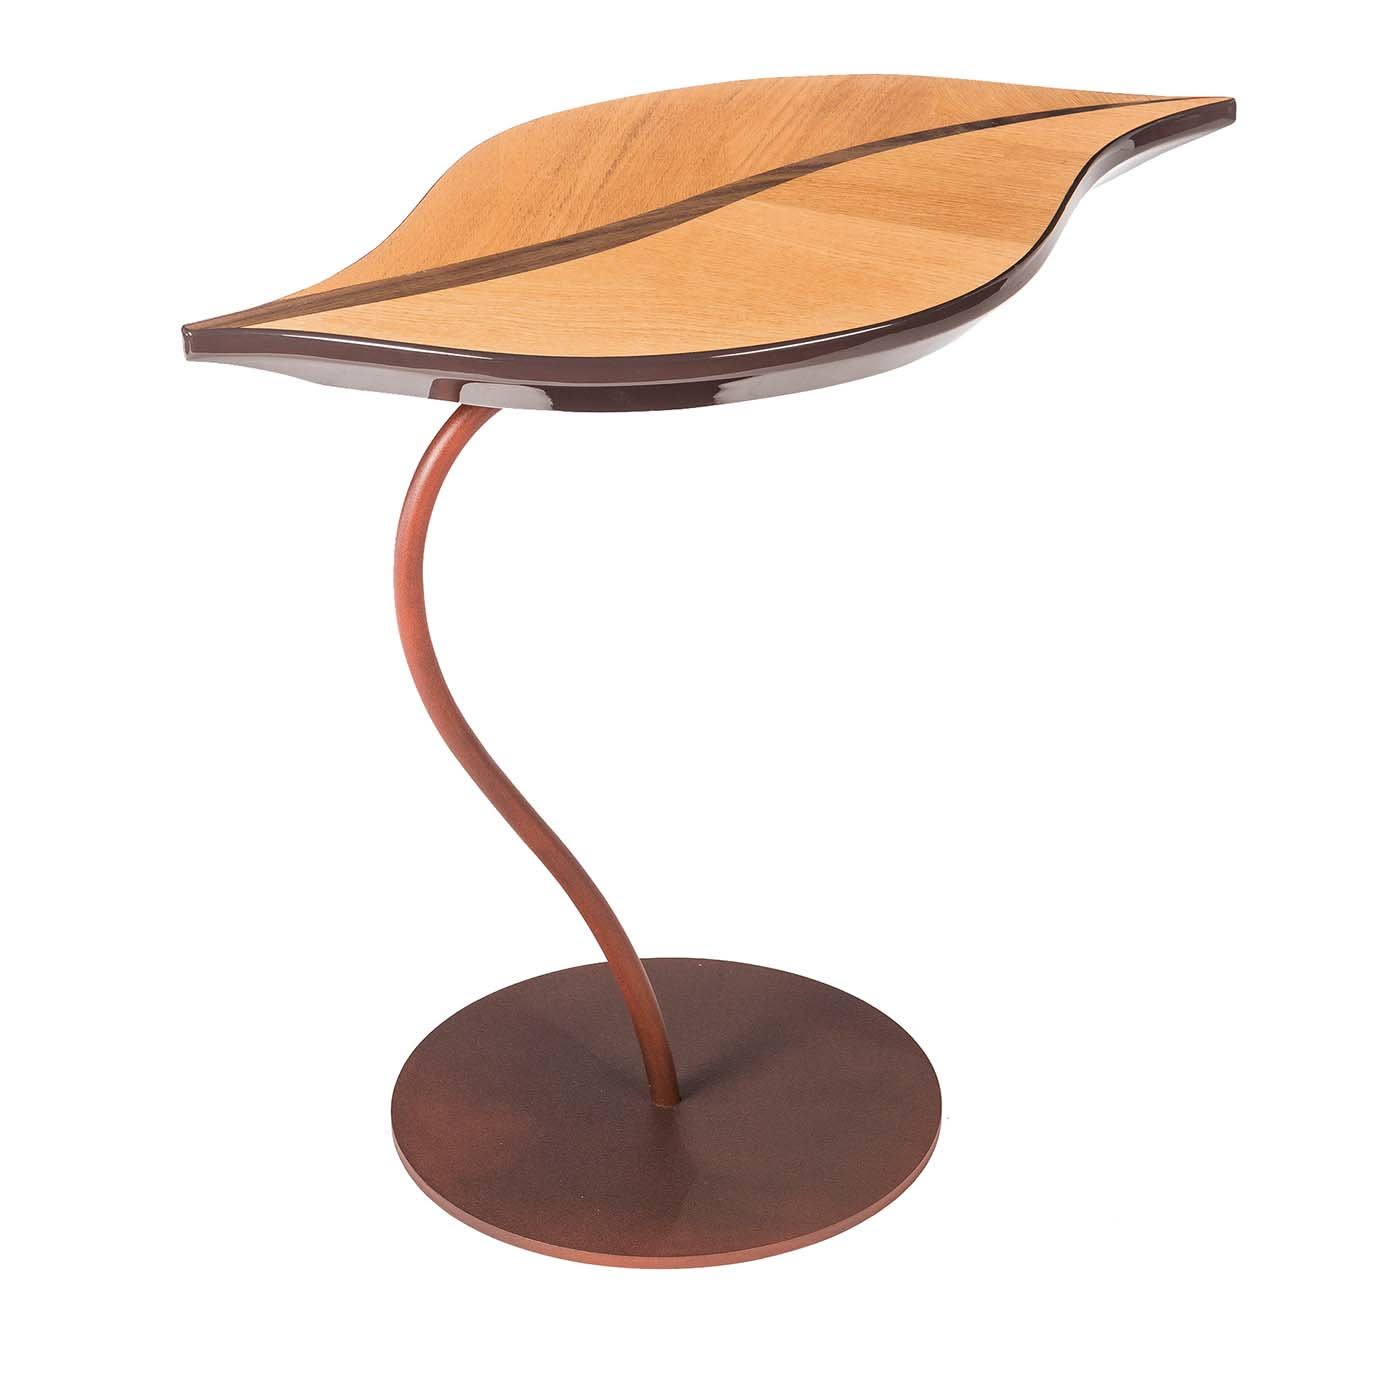 Leaf Fenice Side Table - VGnewtrend